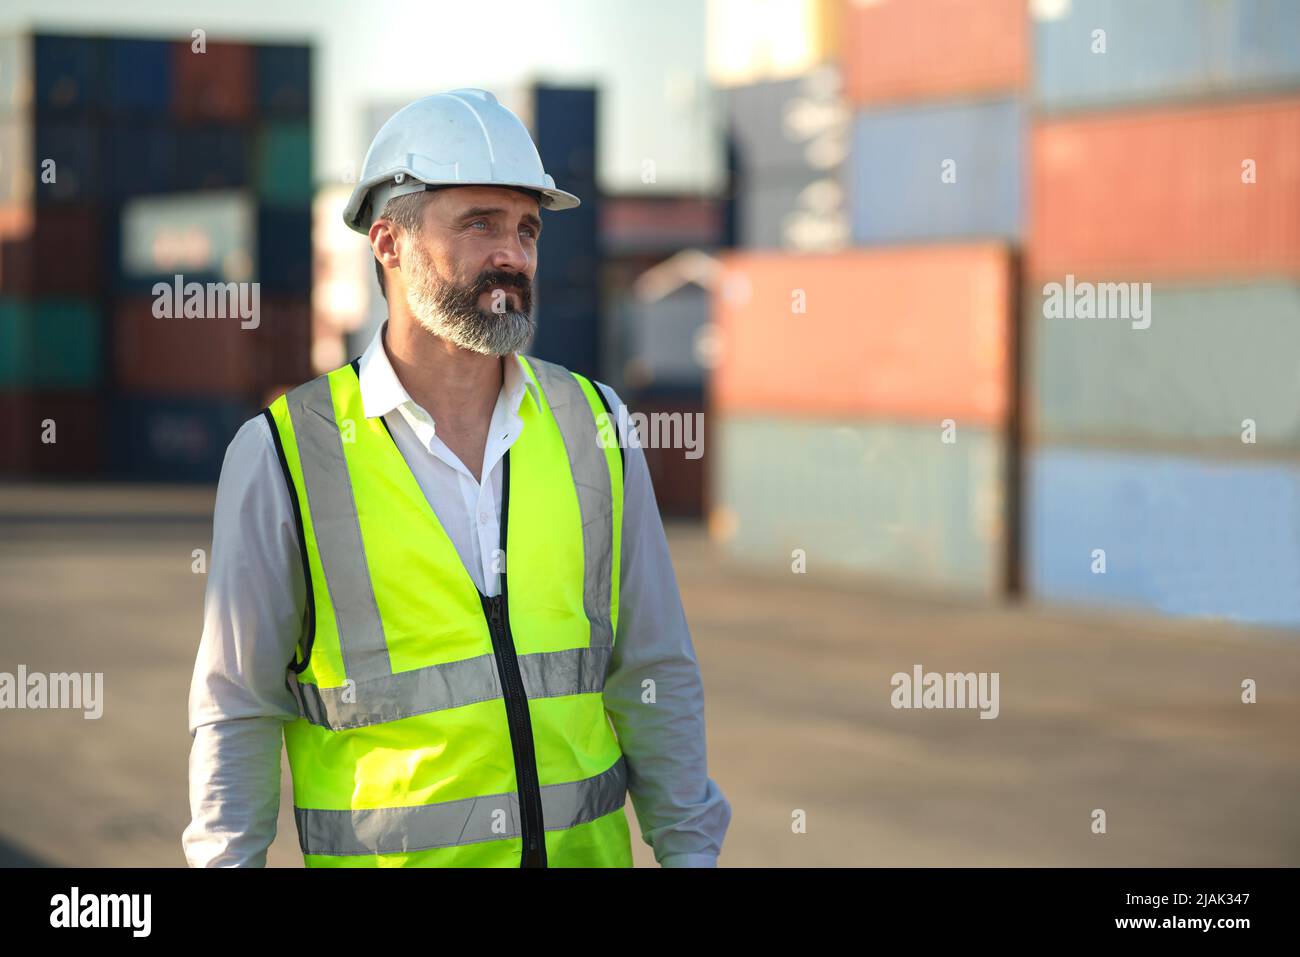 Caucasian male manager in white hard hat helmet and high-visibility vest walking in Container Terminal. Stock Photo